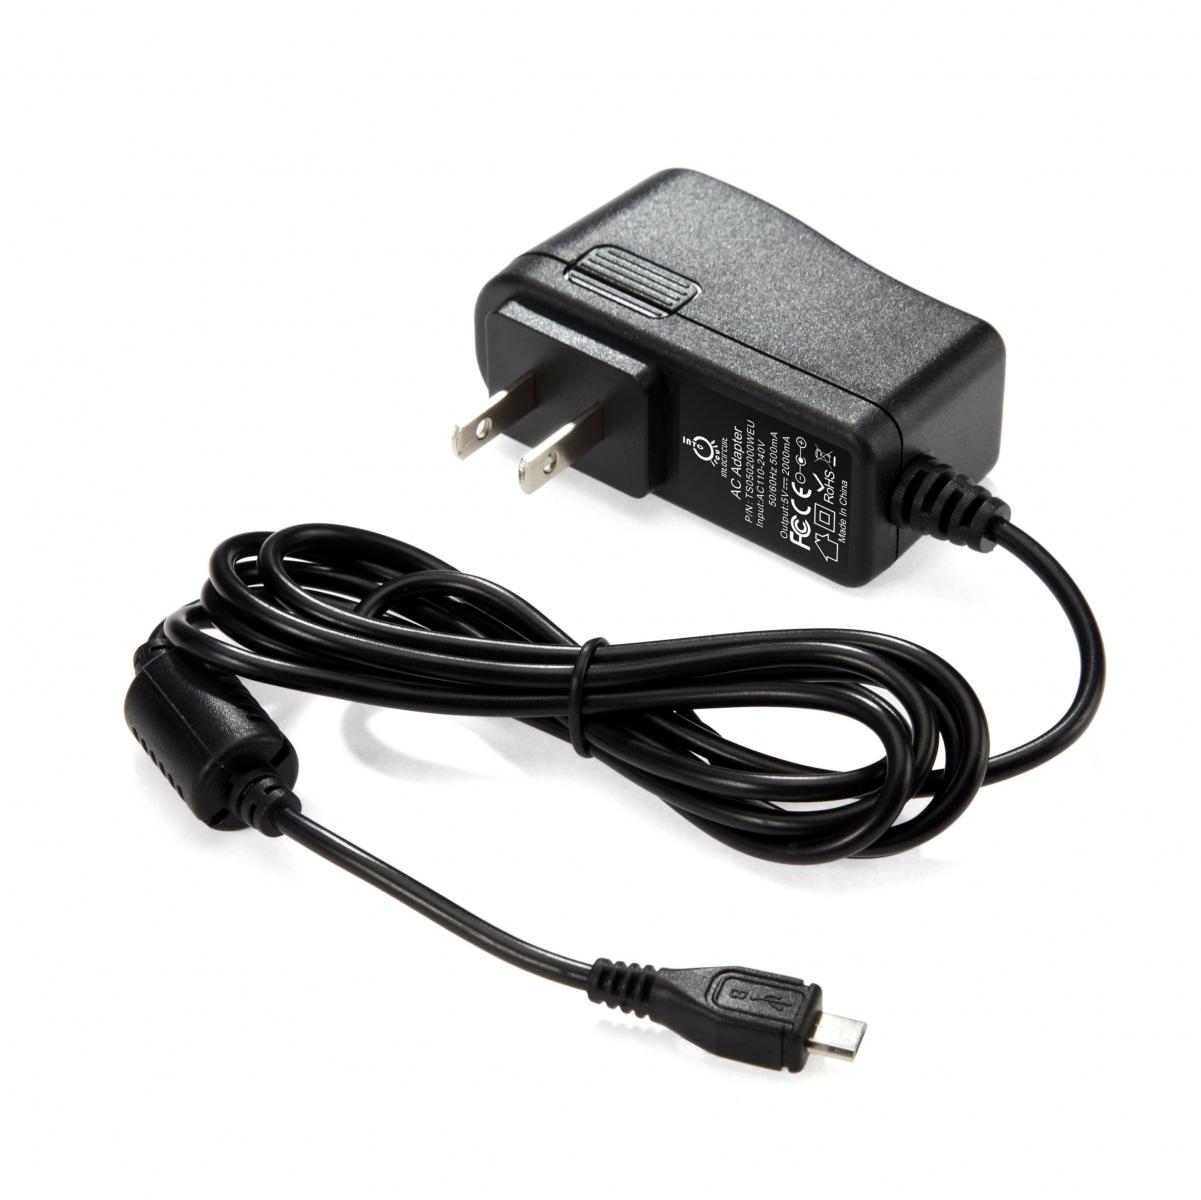 Compatible Replacement Charger for Toshiba Excite Go Mini 7-Inch Tablet AT7-C8.